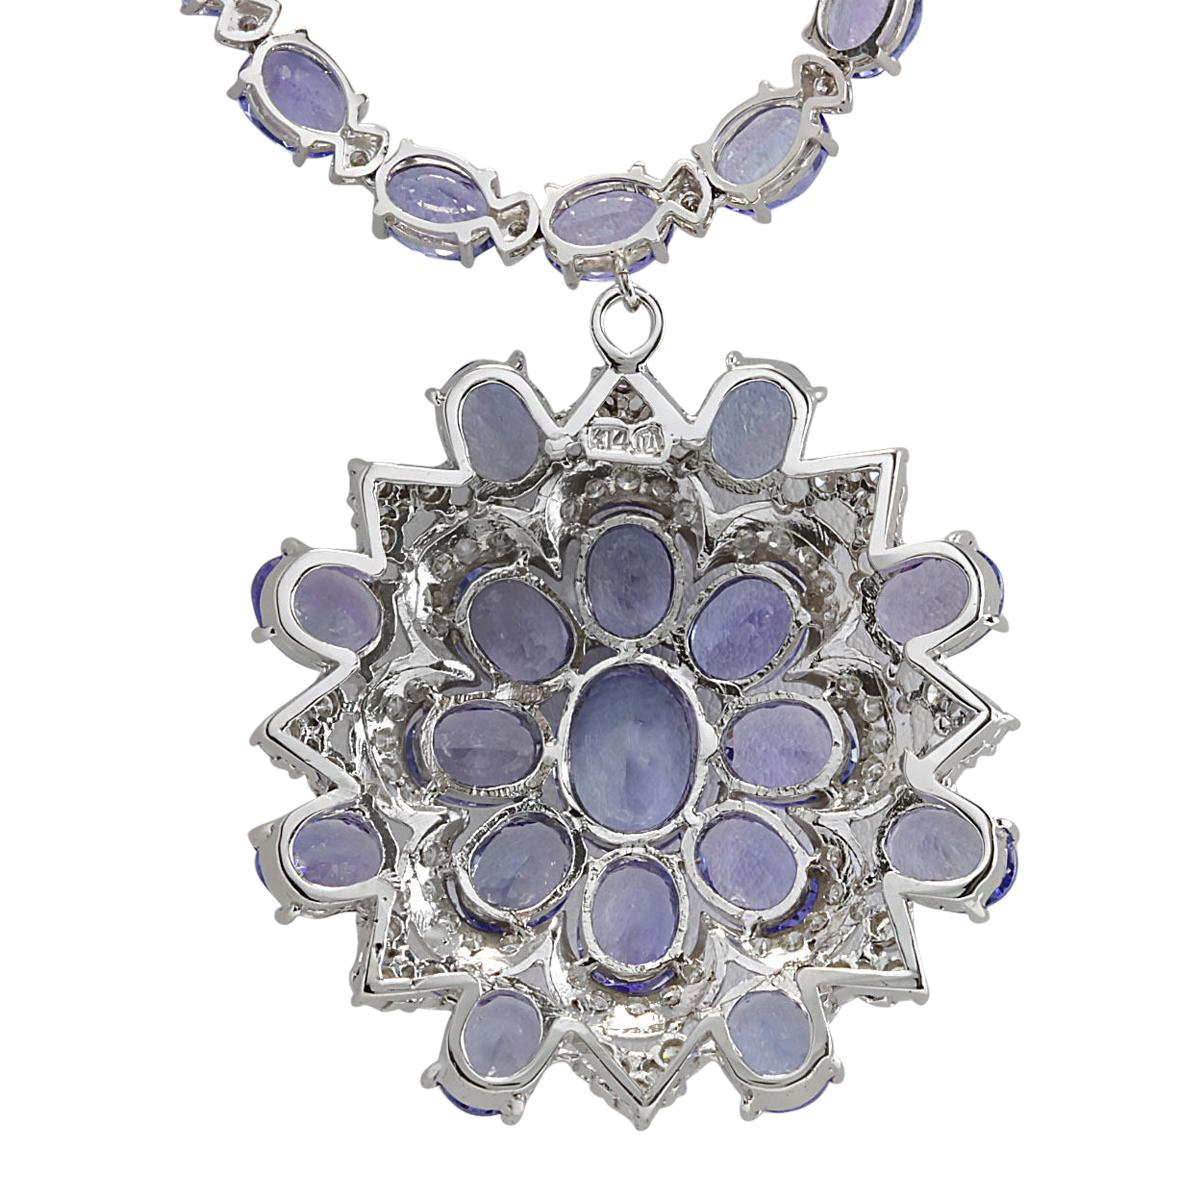 Stamped: 14K White Gold
Total Necklace Weight: 39.6 Grams
Necklace Length: 17 Inches
Total Natural Center Tanzanite Weight is 3.83 Carat (Measures: 11.00x9.00 mm)
Color: Blue
Total Natural Side Tanzanite Weight is 65.01 Carat
Color: Blue
Total